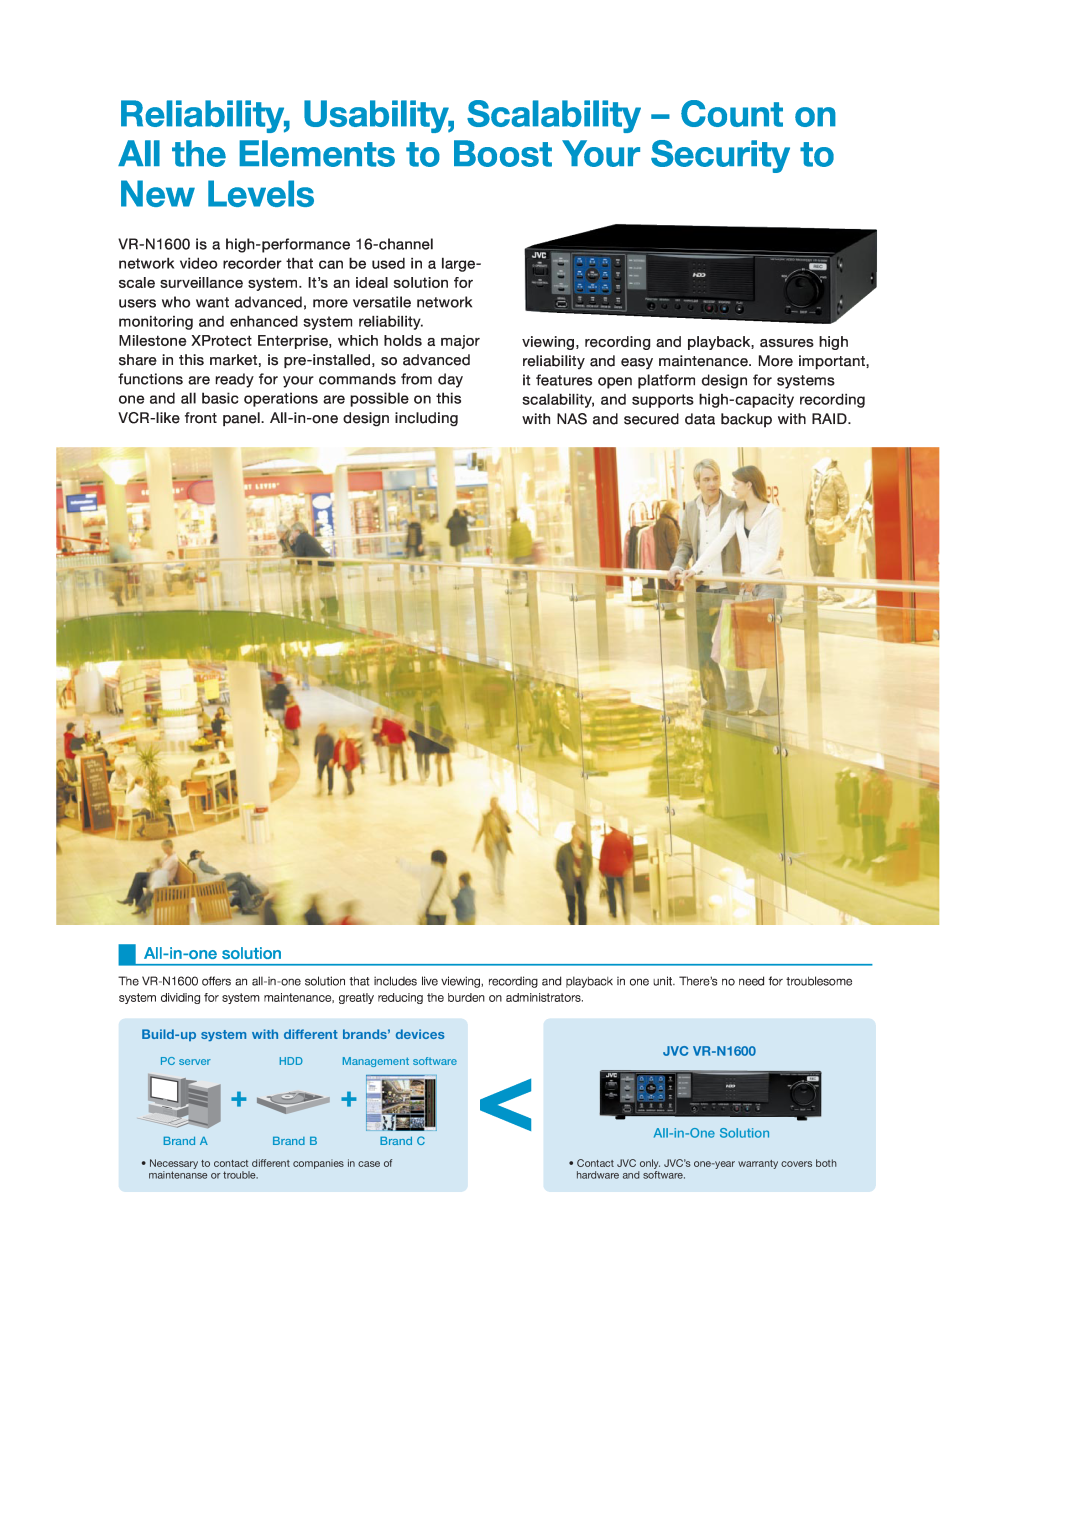 JVC manual All-in-one solution, Build-up system with different brands’ devices, JVC VR-N1600 